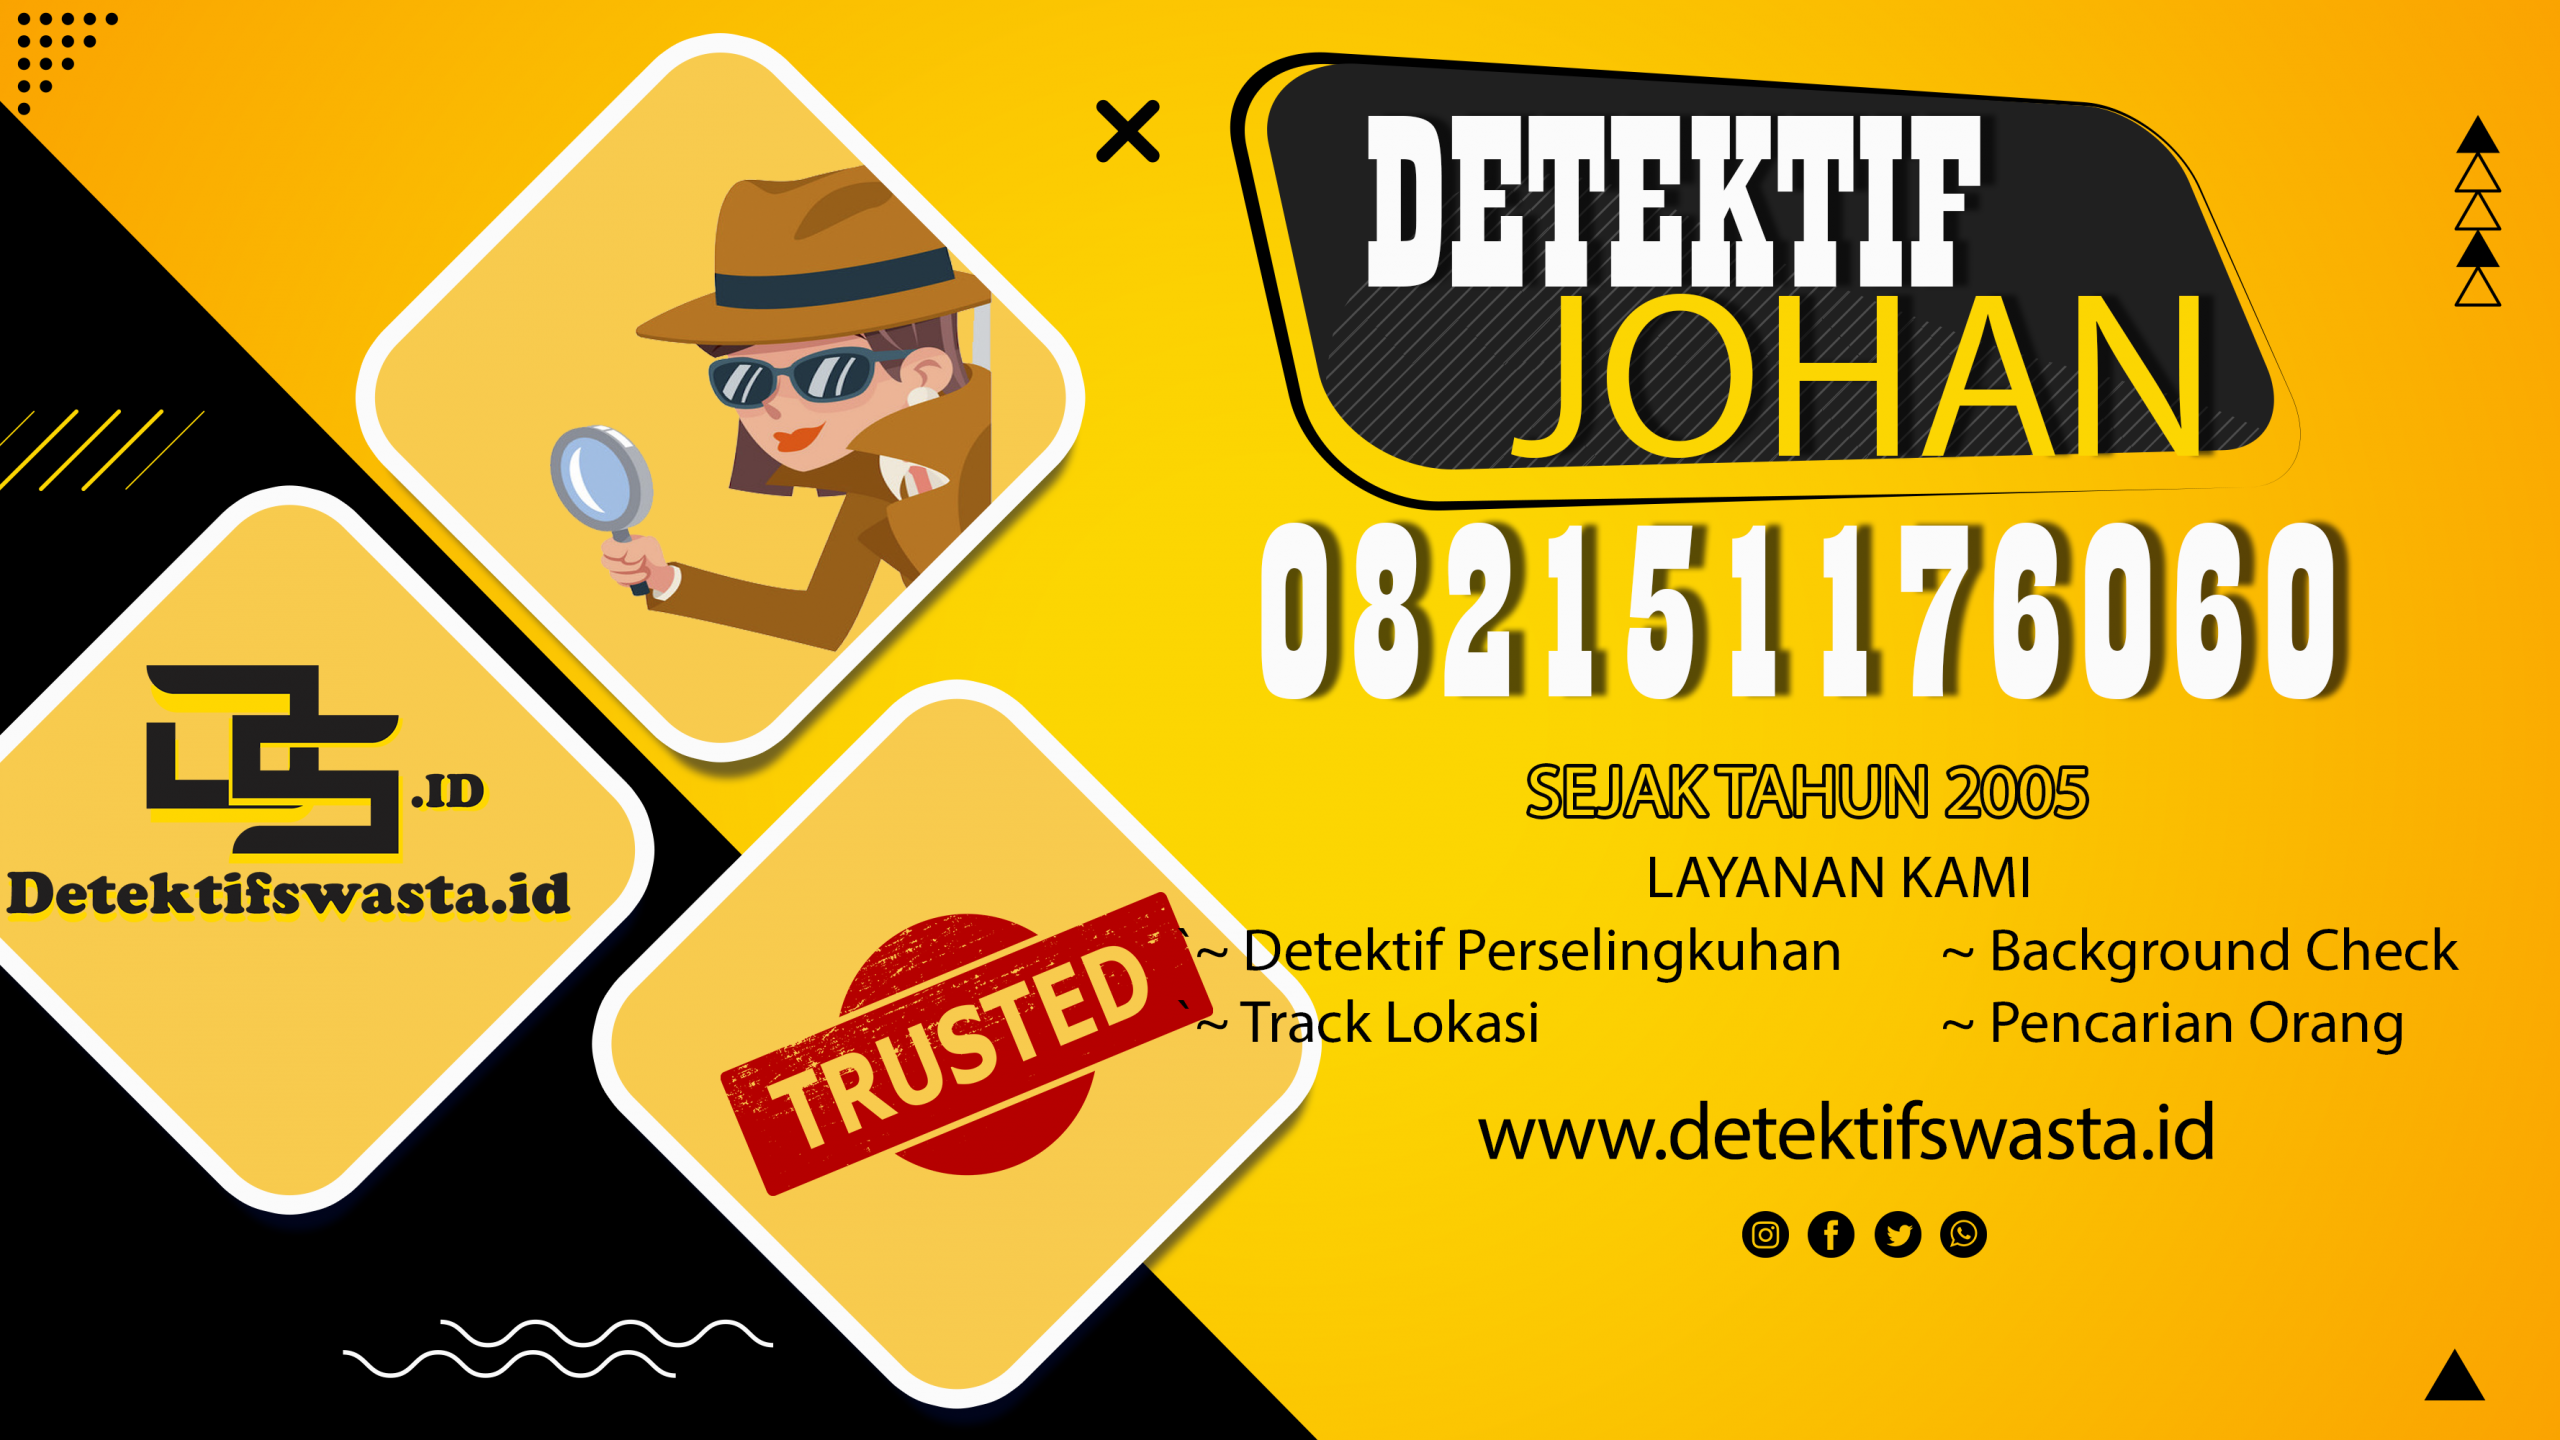 Detektif Perselingkuhan detektif perselingkuhan Detektif Perselingkuhan Geliat Poligami,Nikah Siri, Perselingkuhan Banner